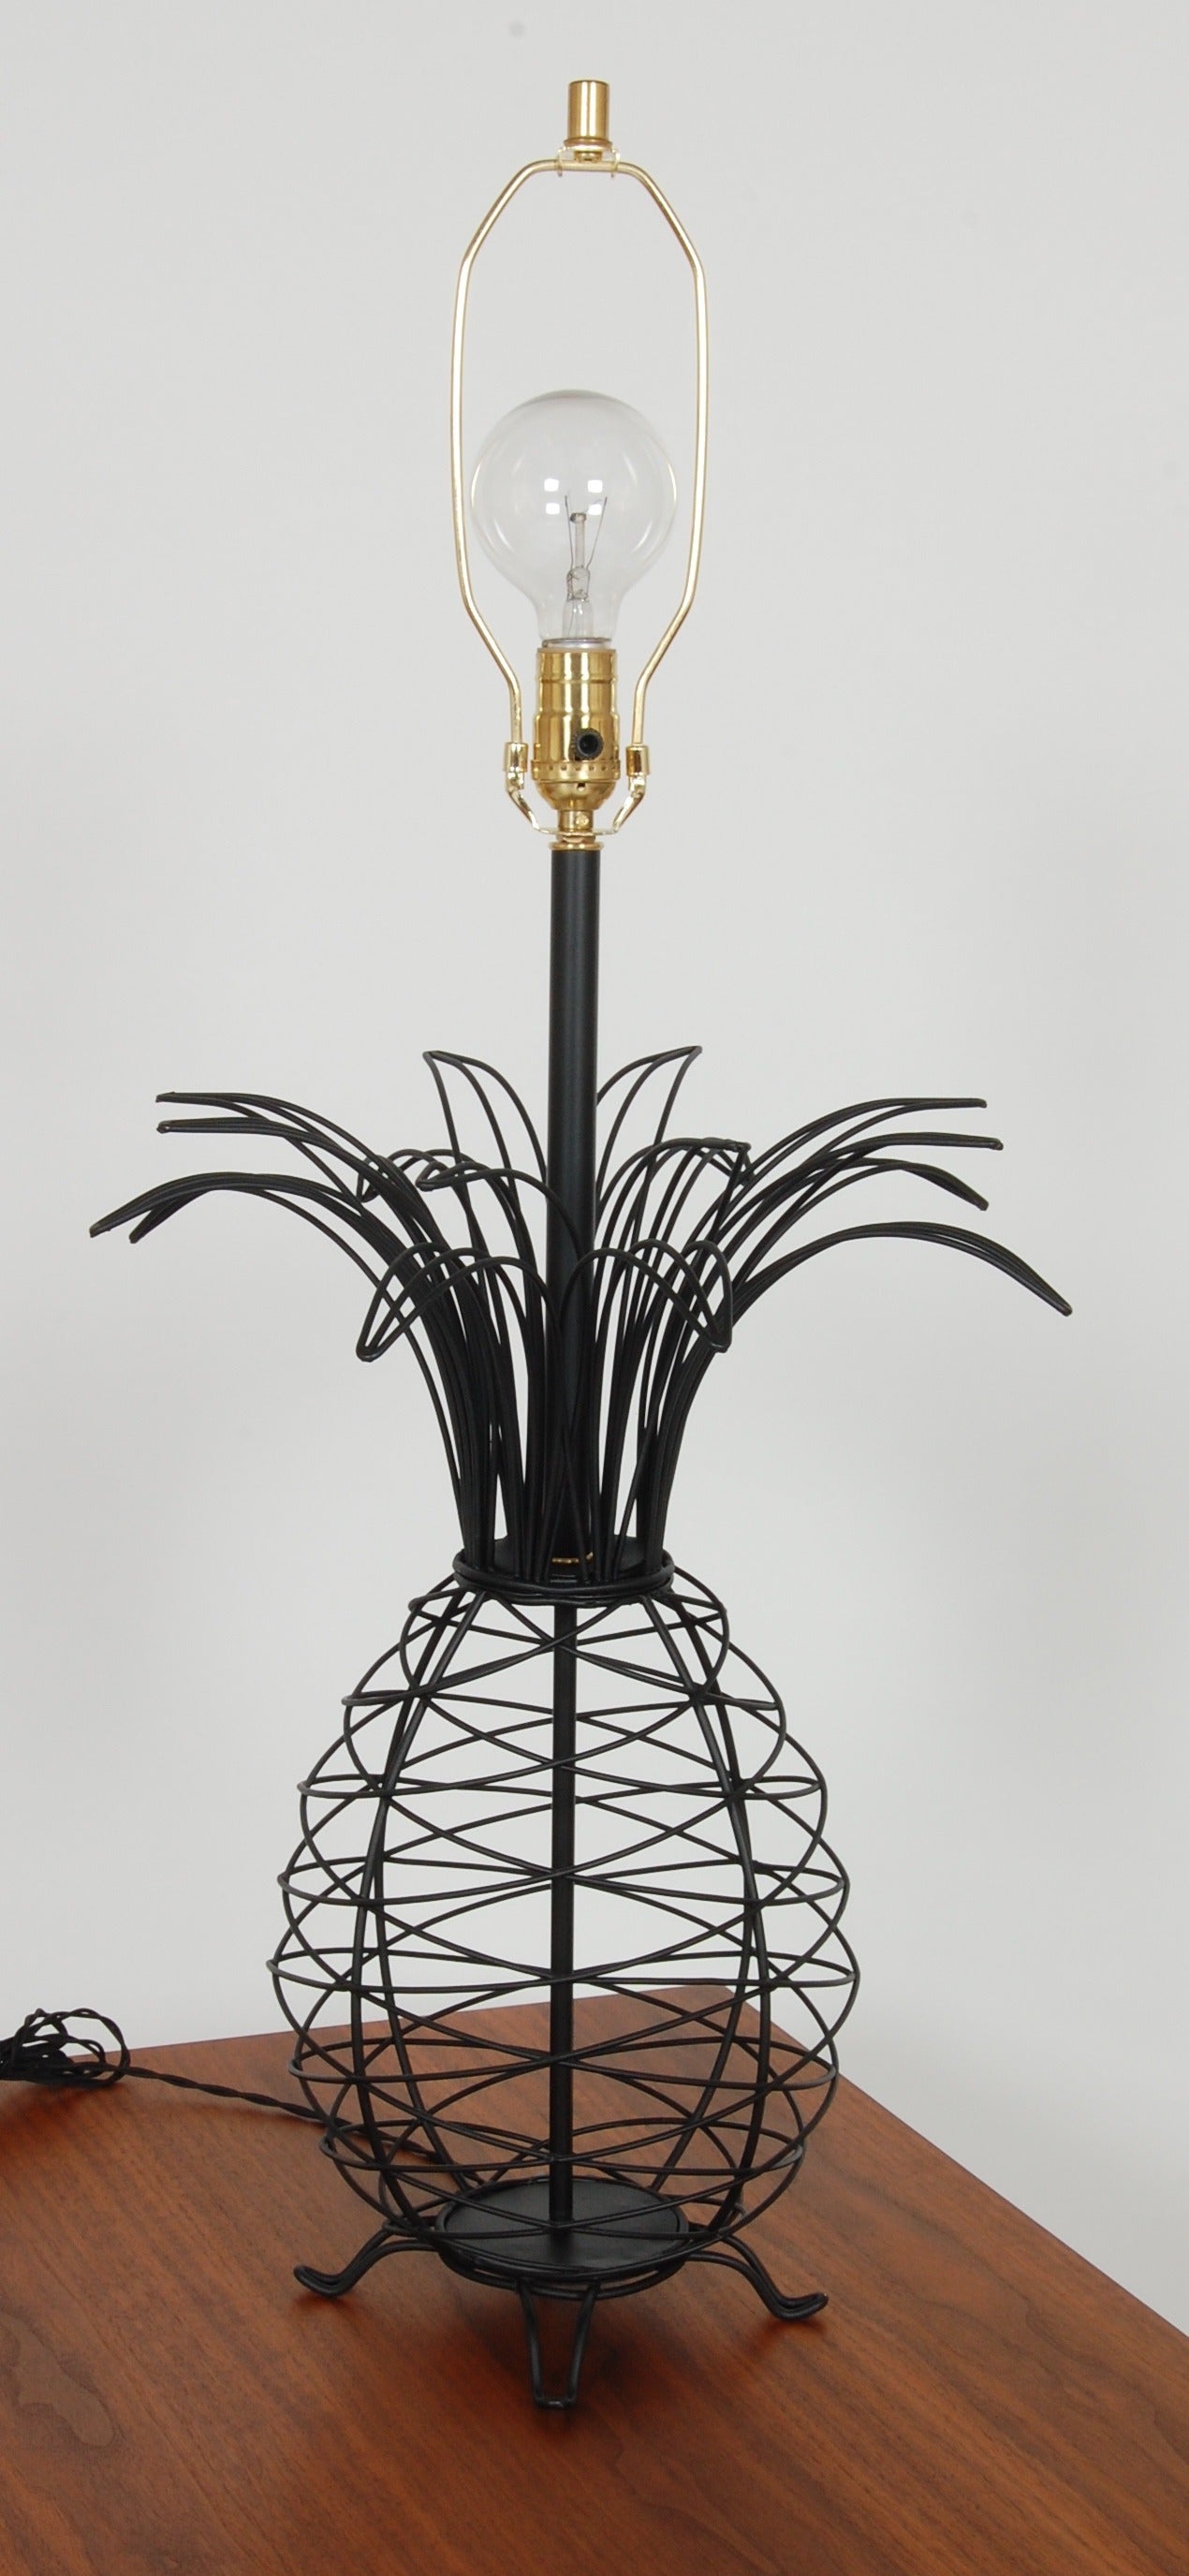 Designed by Andree Ferris and Reta Shacknove for Robert Gottschalk, NY in 1952. Created out of thick wire welded together in the form of a pineapple, newly painted and rewired, the height measurement is to the top of the socket.